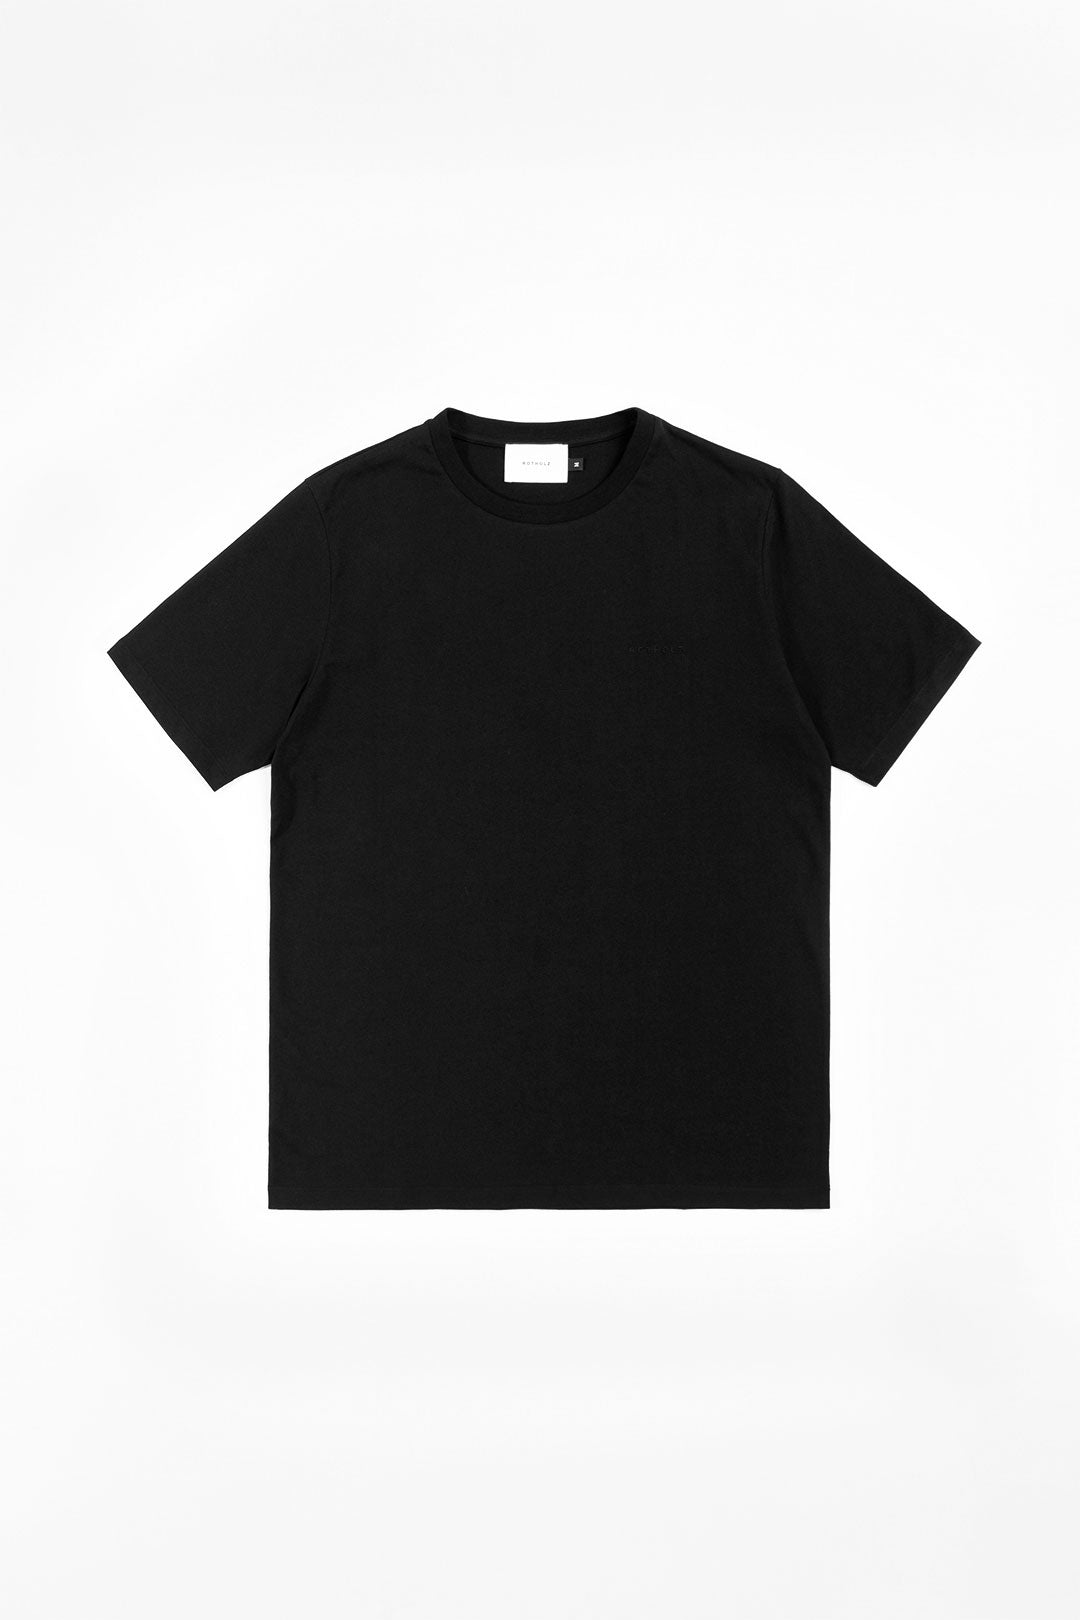 Black T-shirt logo made from 100% organic cotton from Rotholz